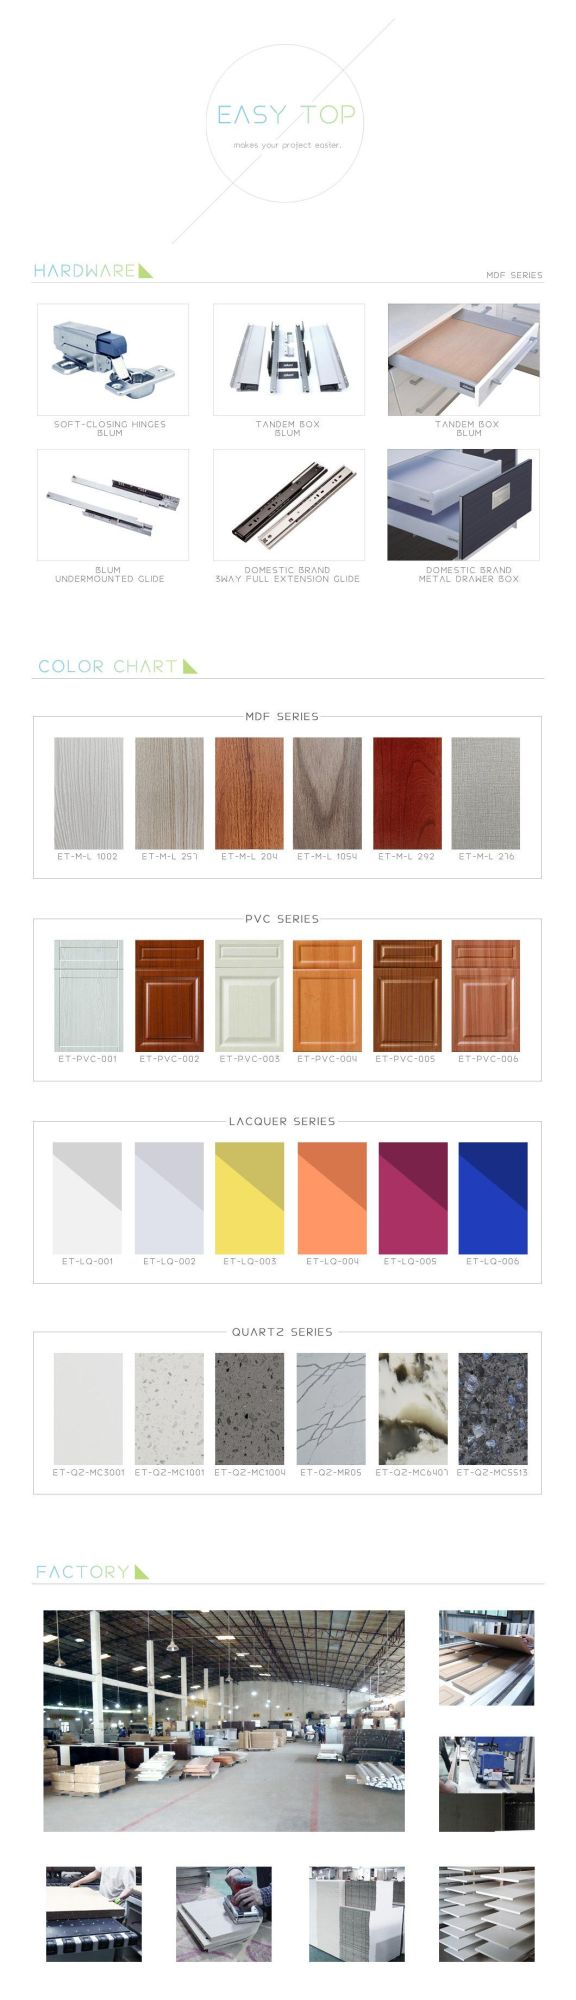 Hot Selling PVC Wall Mounting Bathroom Vanities with Mirror Wall Cabinets